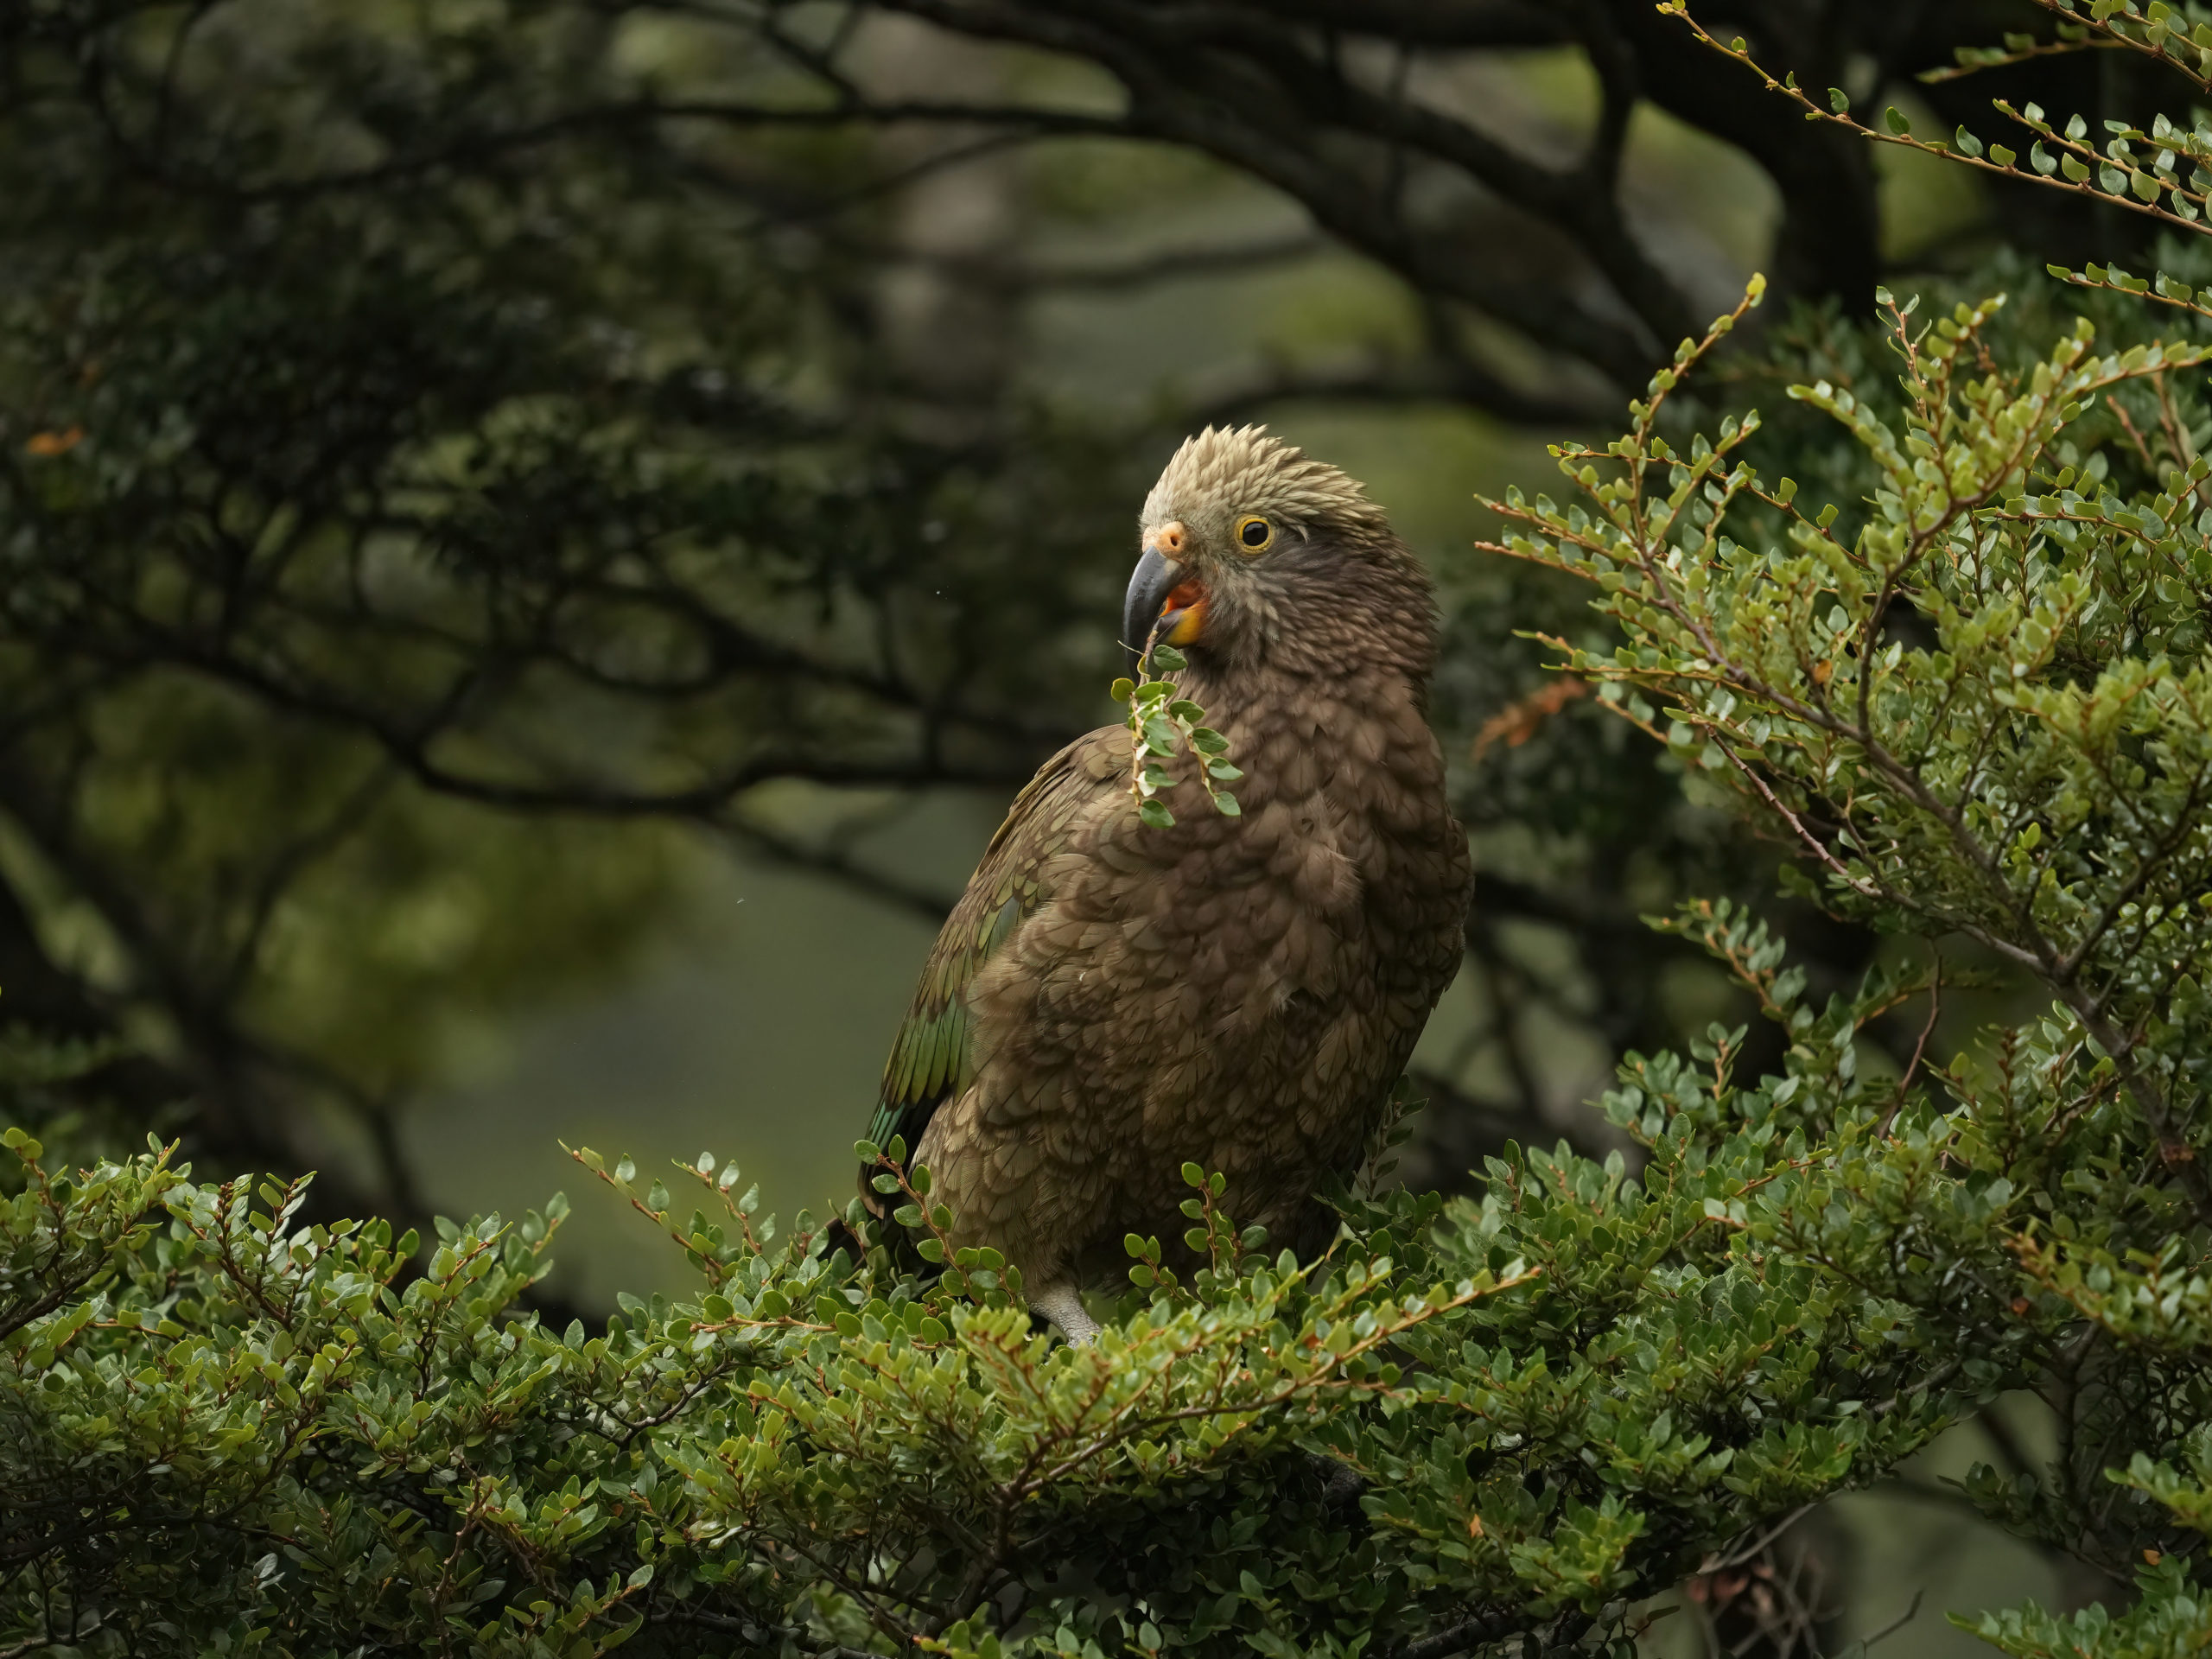 Kea perched in a tree eating a leaf.